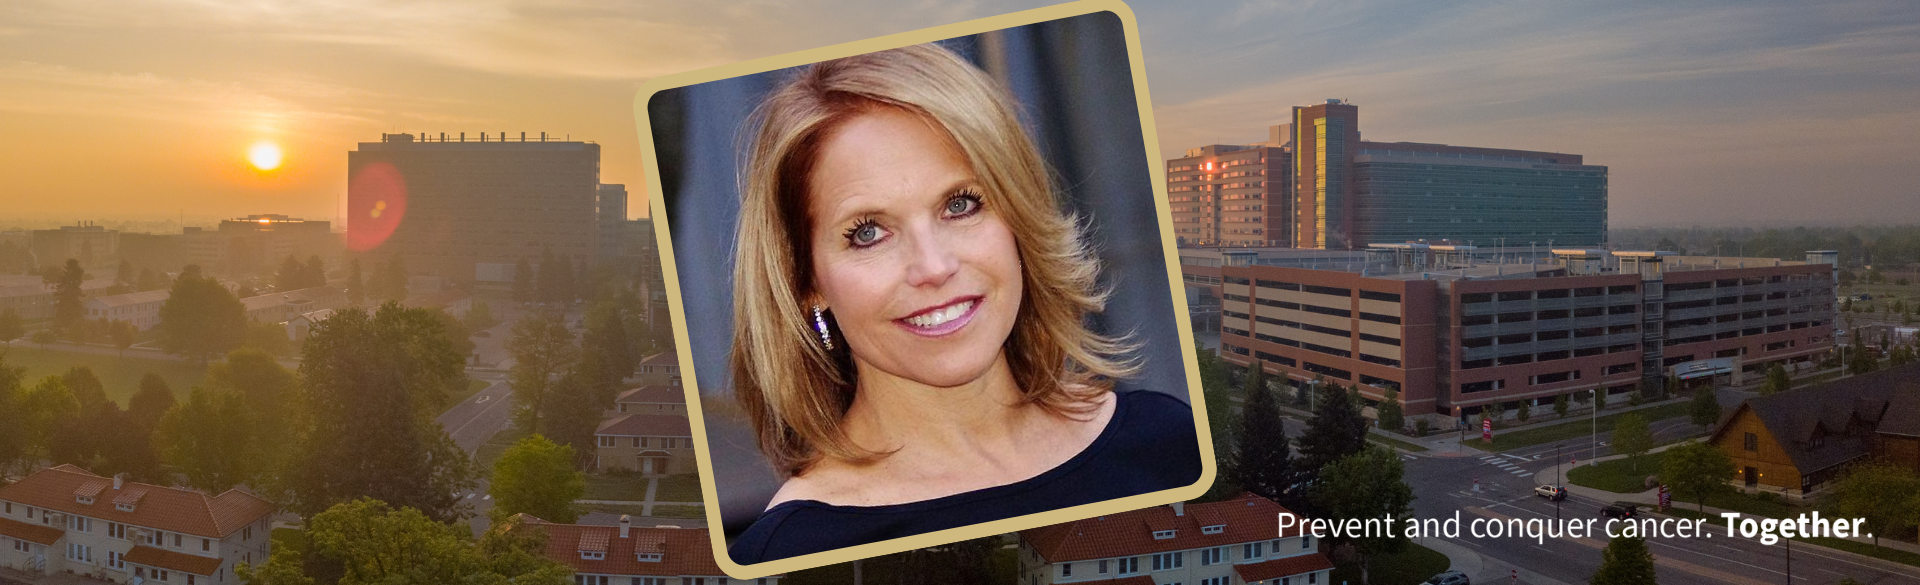 Former “TODAY” show anchor Katie Couric revealed that she was diagnosed with breast cancer in summer 2022 and underwent surgery and radiation.